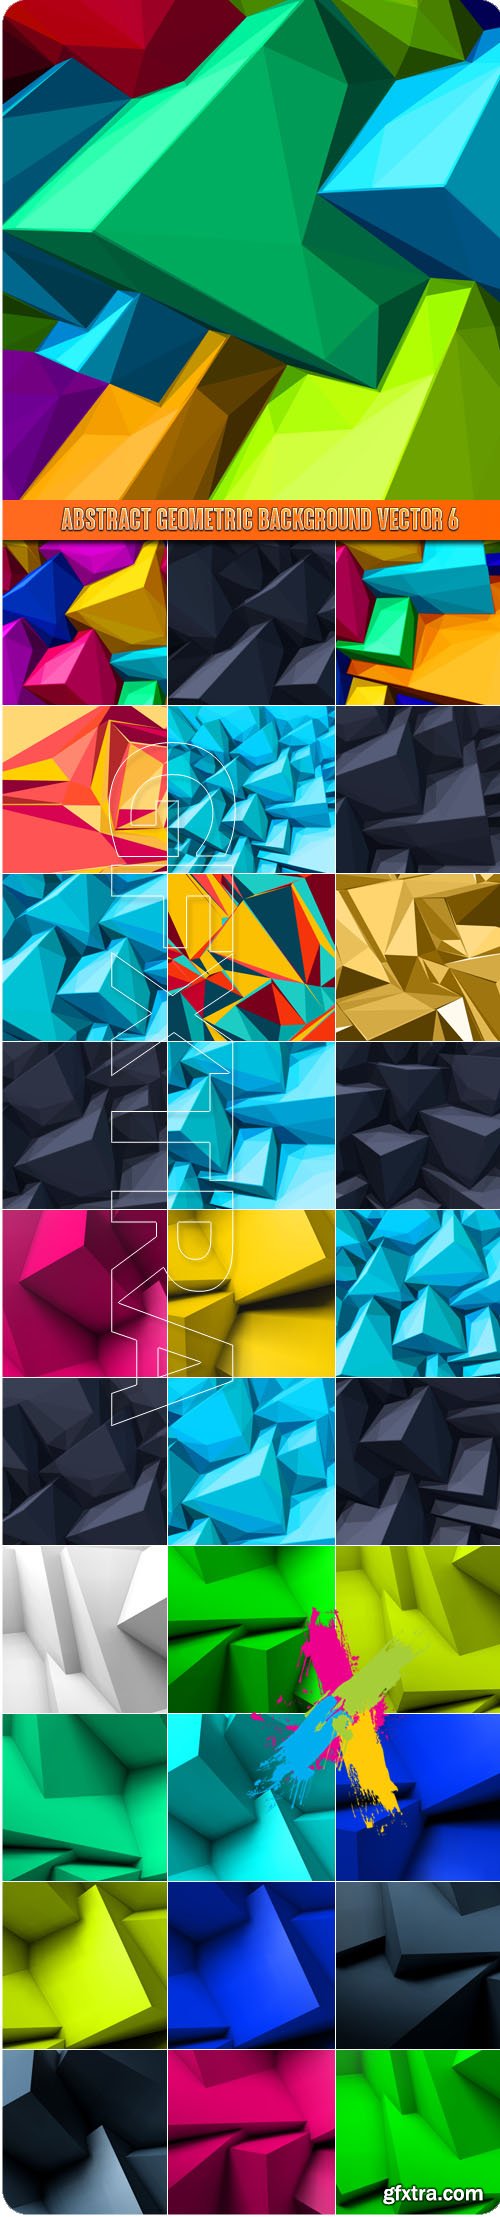 Abstract geometric background vector 6